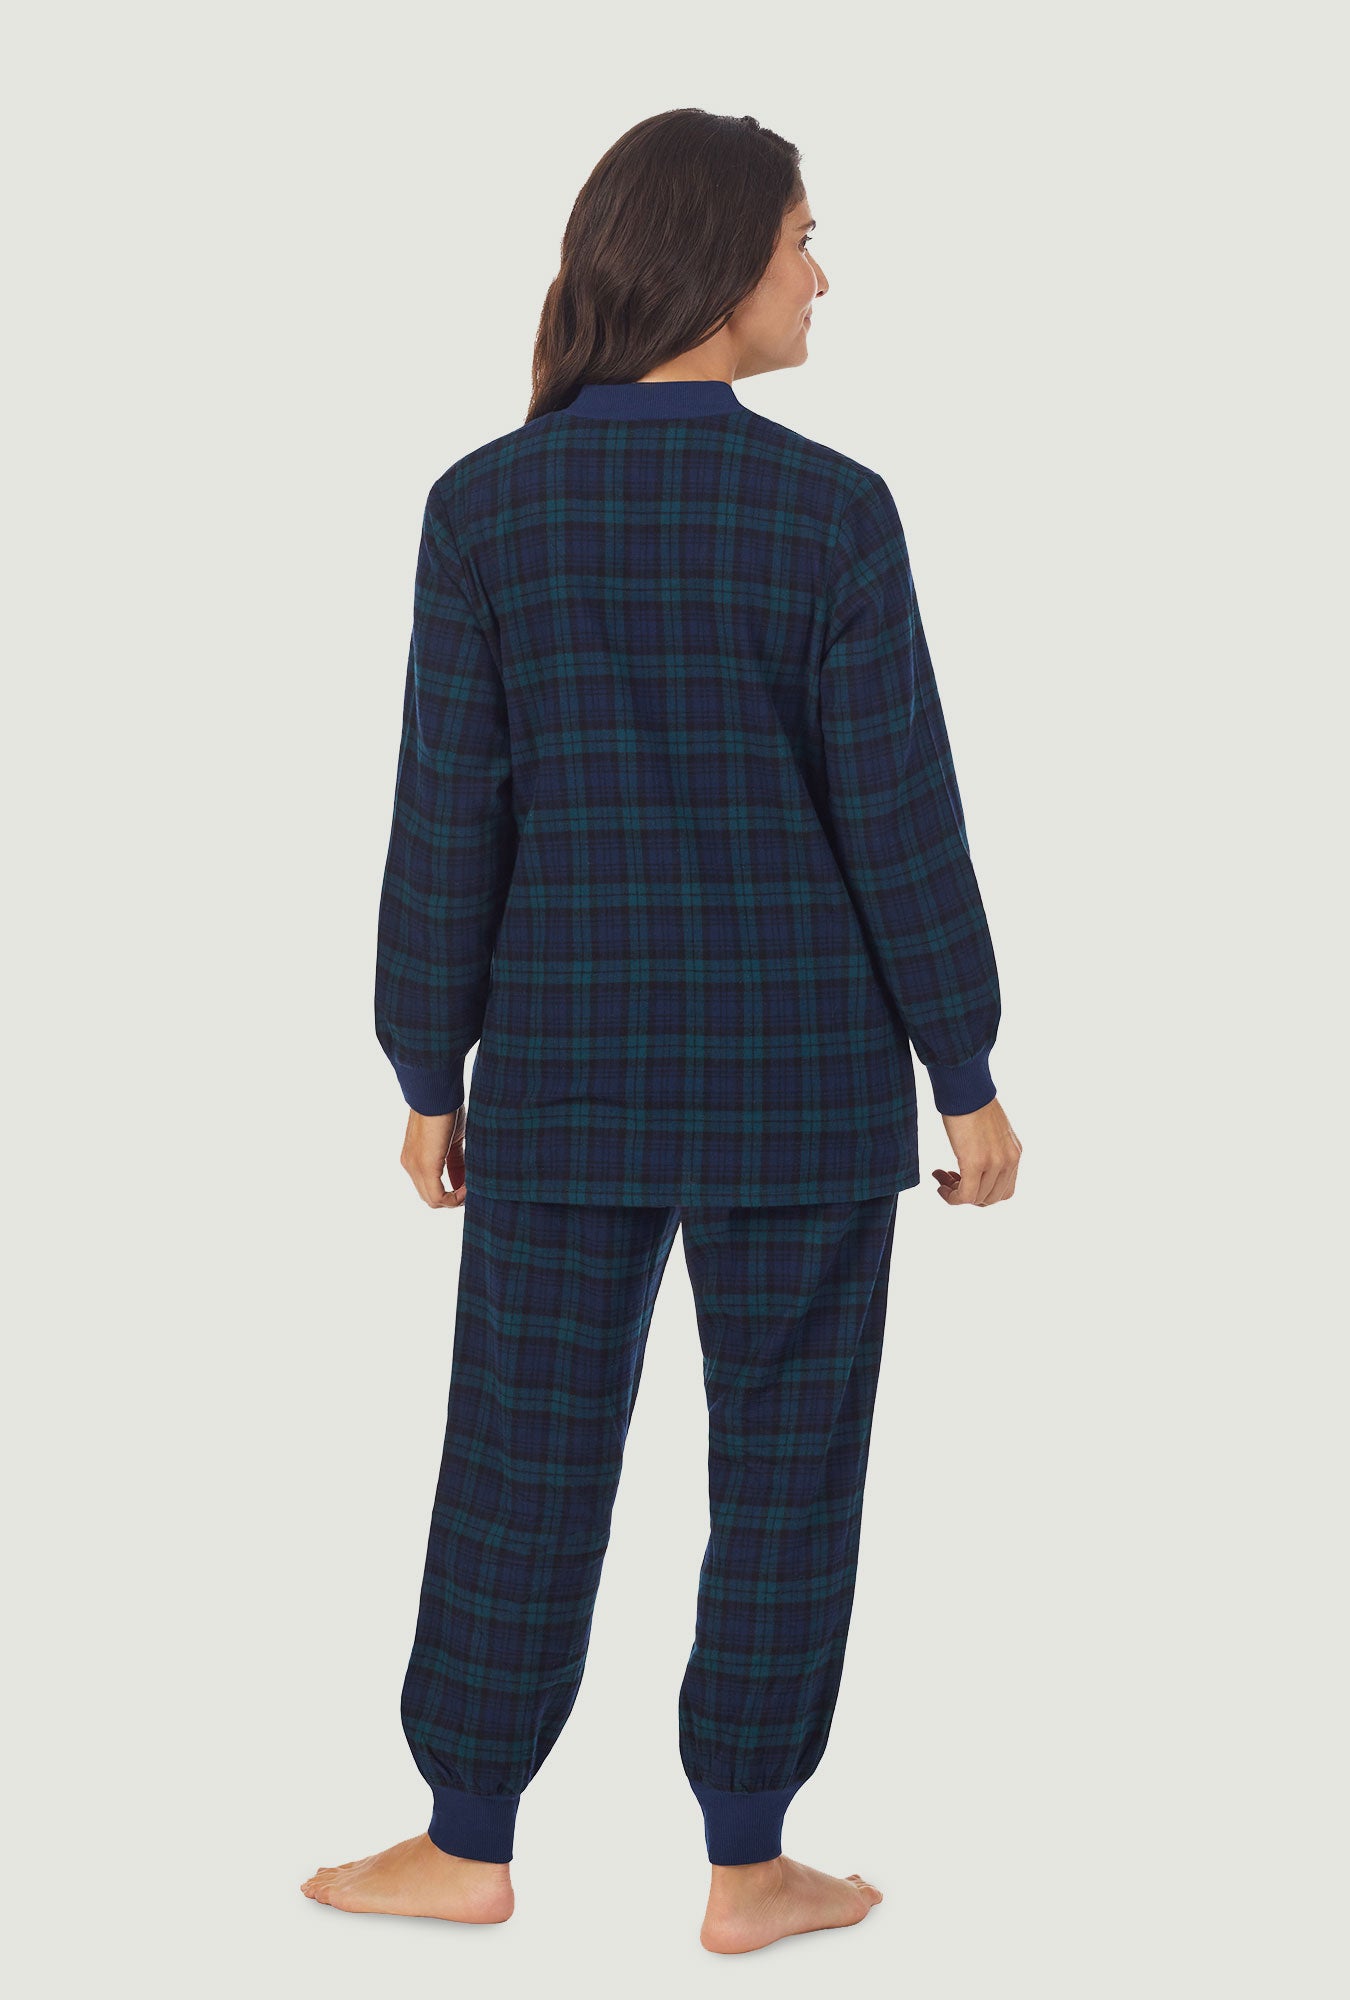 A lady wearing a long sleeve pajama with black watch plaid  pattern.